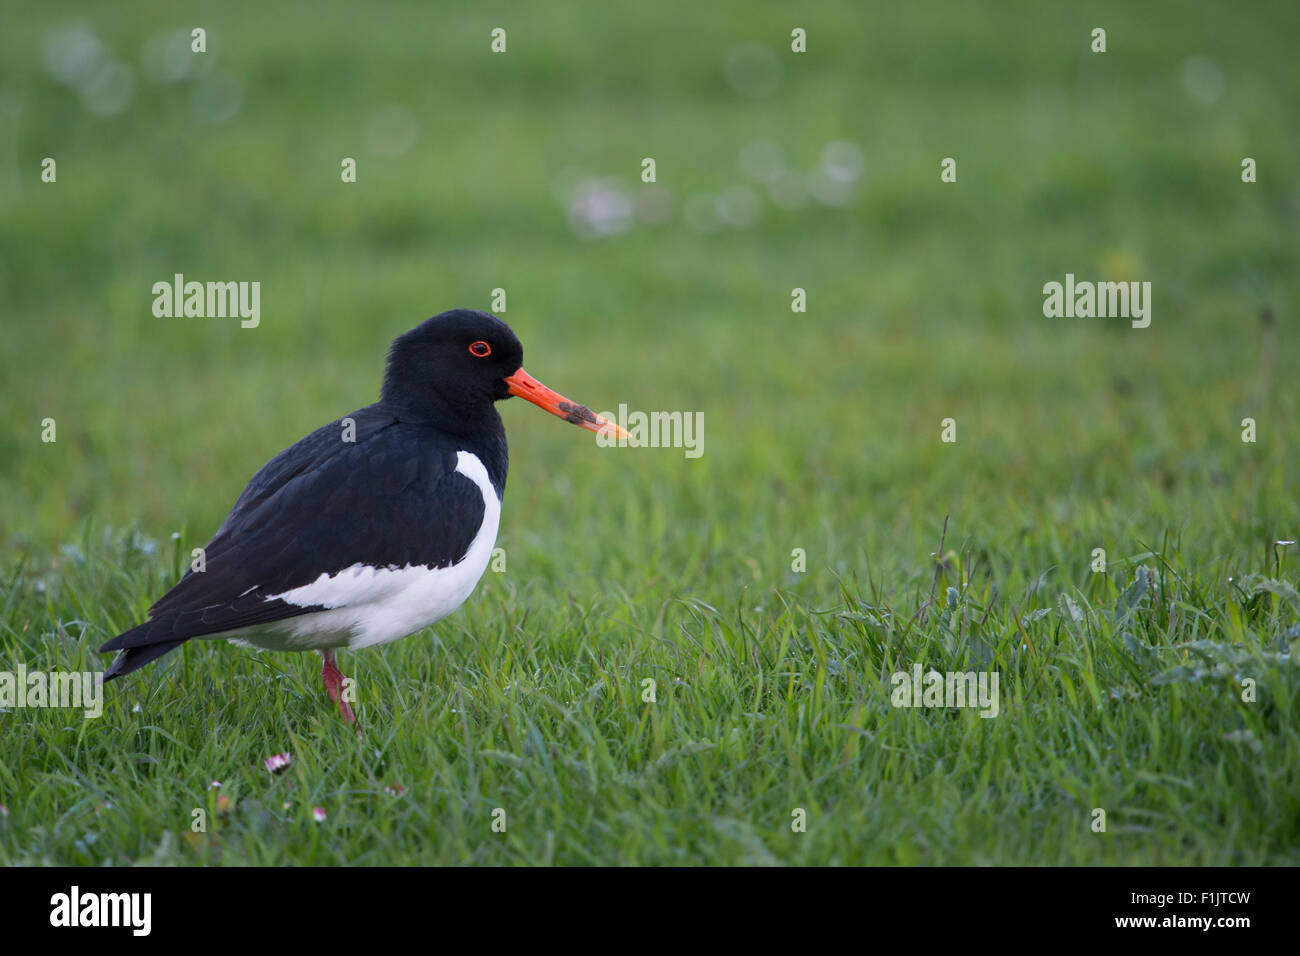 Oystercatcher / Austernfischer ( Haematopus ostralegus ) stands on extensive meadows searching for food. Stock Photo